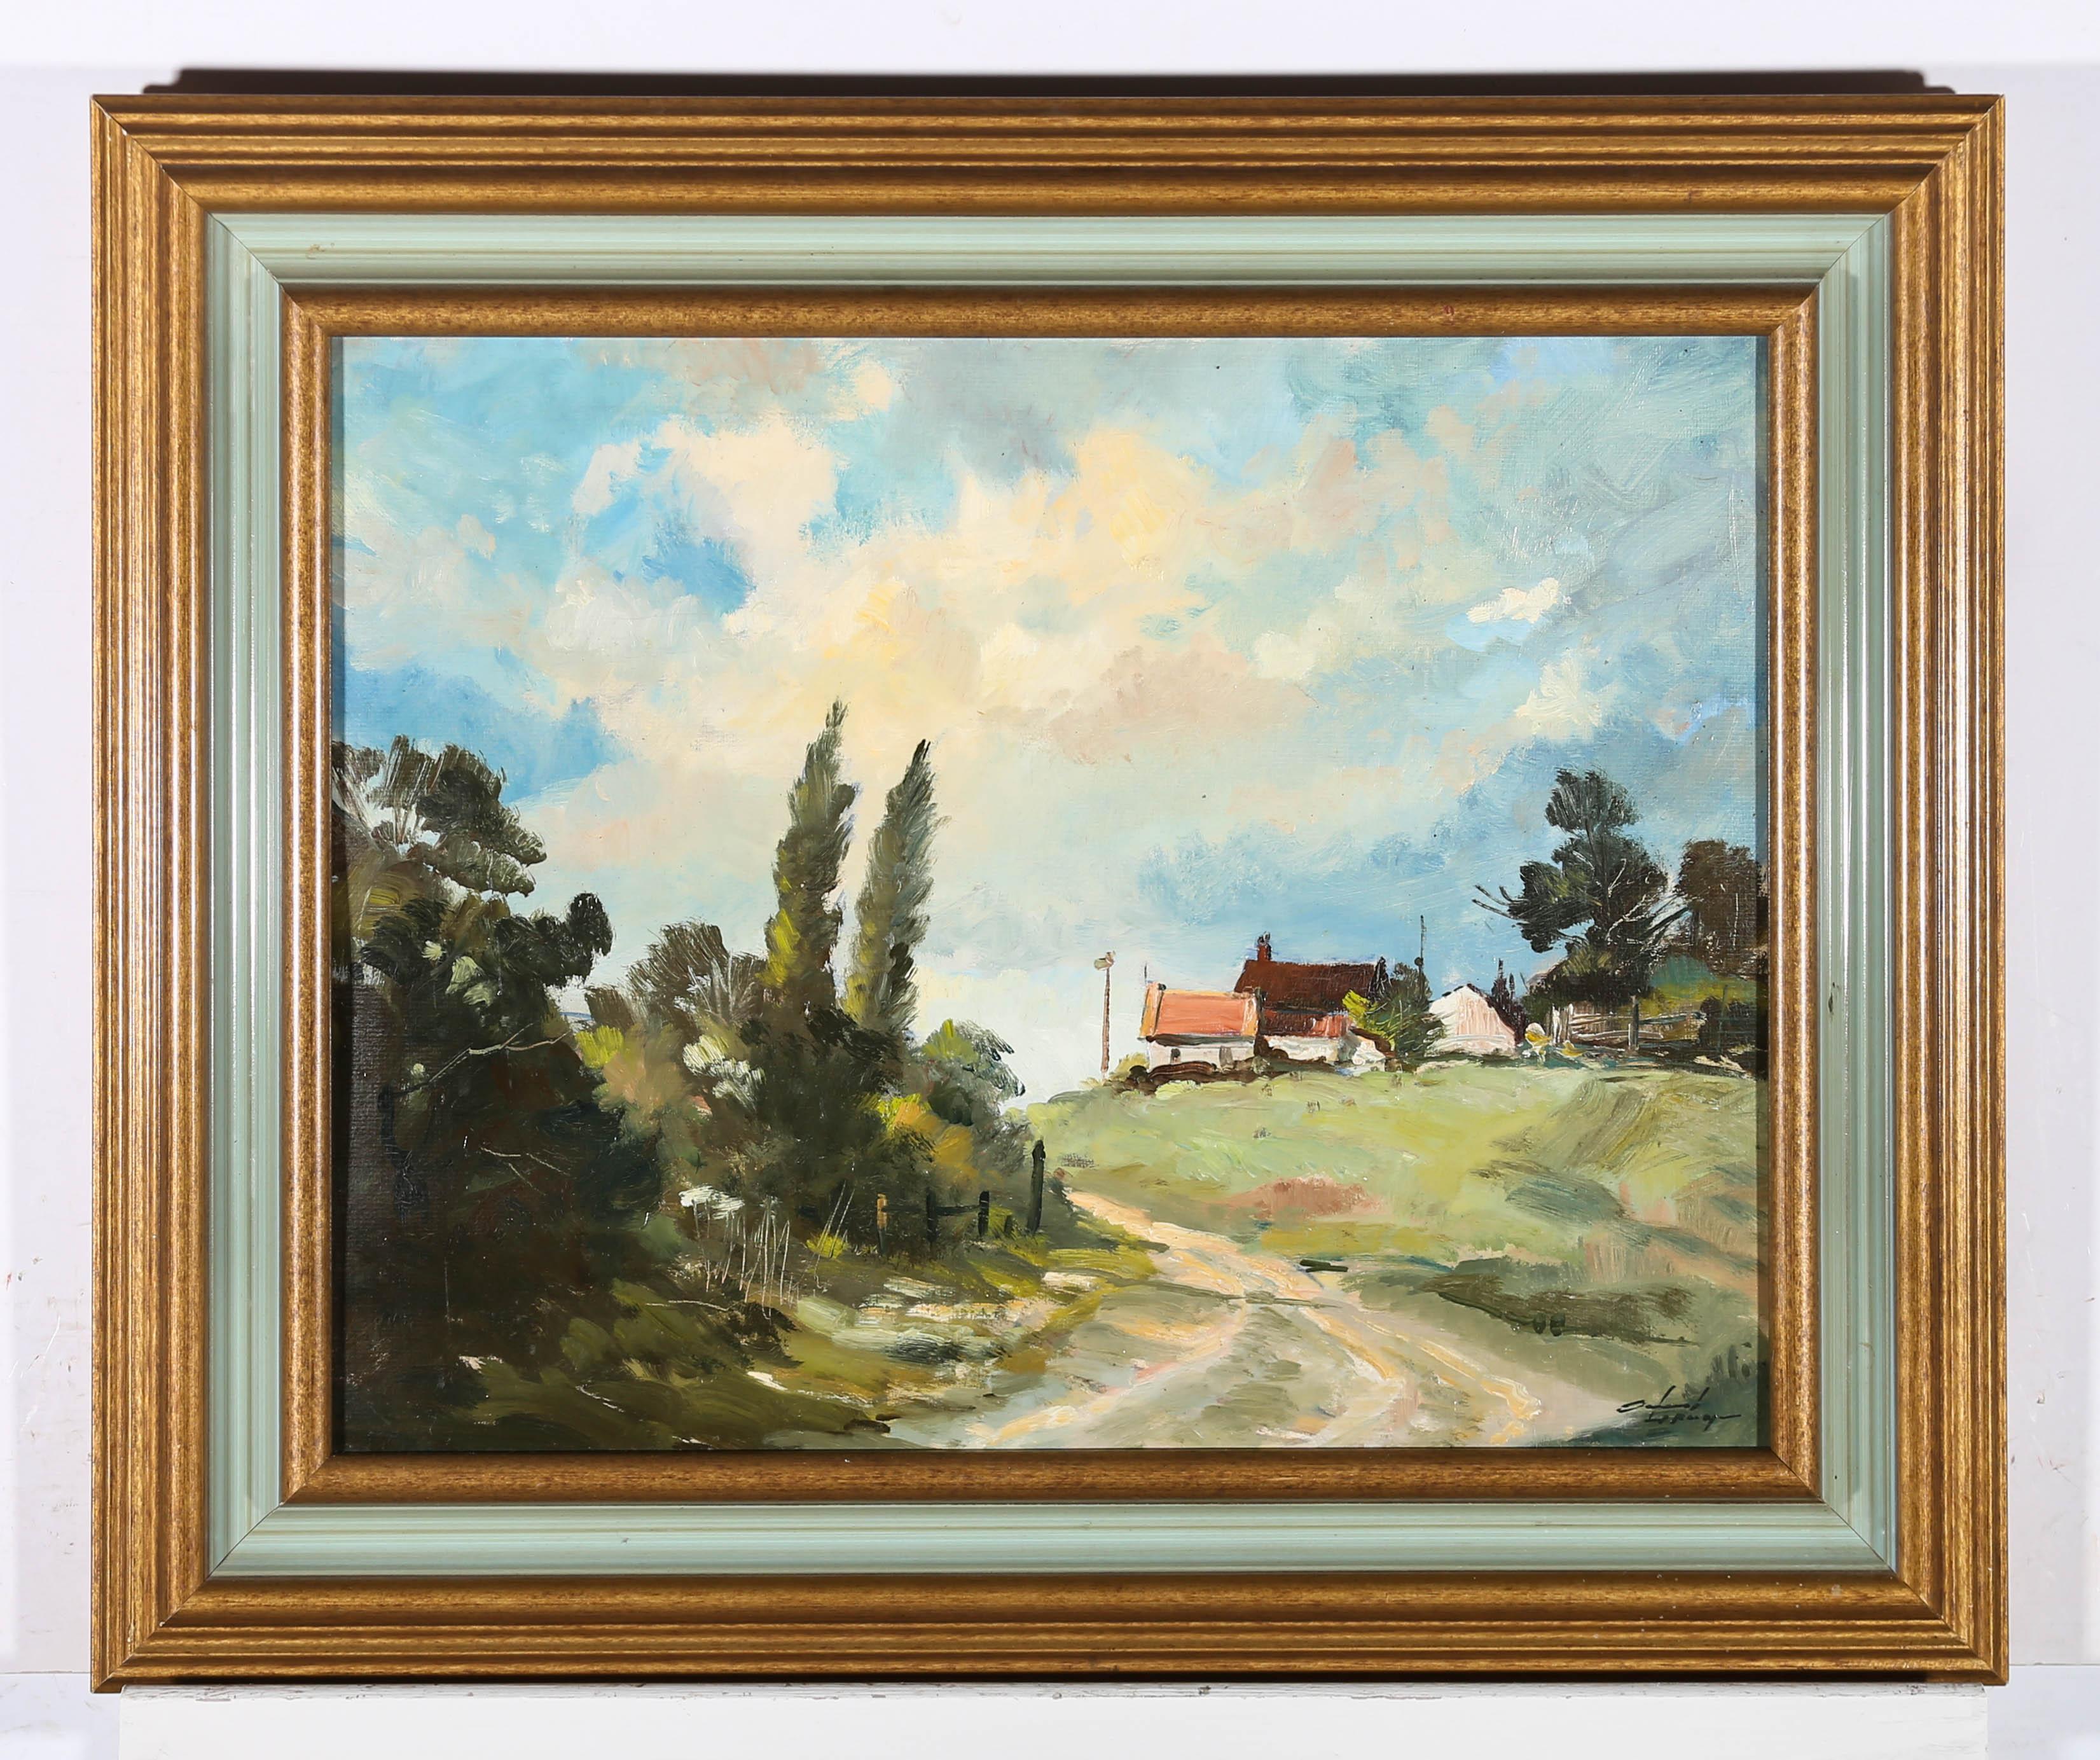 This charming oil study depicts a quaint country track leading to a small farm. The artist has captured the scene in an impressionist style, using expressive brushwork to convey their rural surroundings. Signed to the lower right. Well presented in